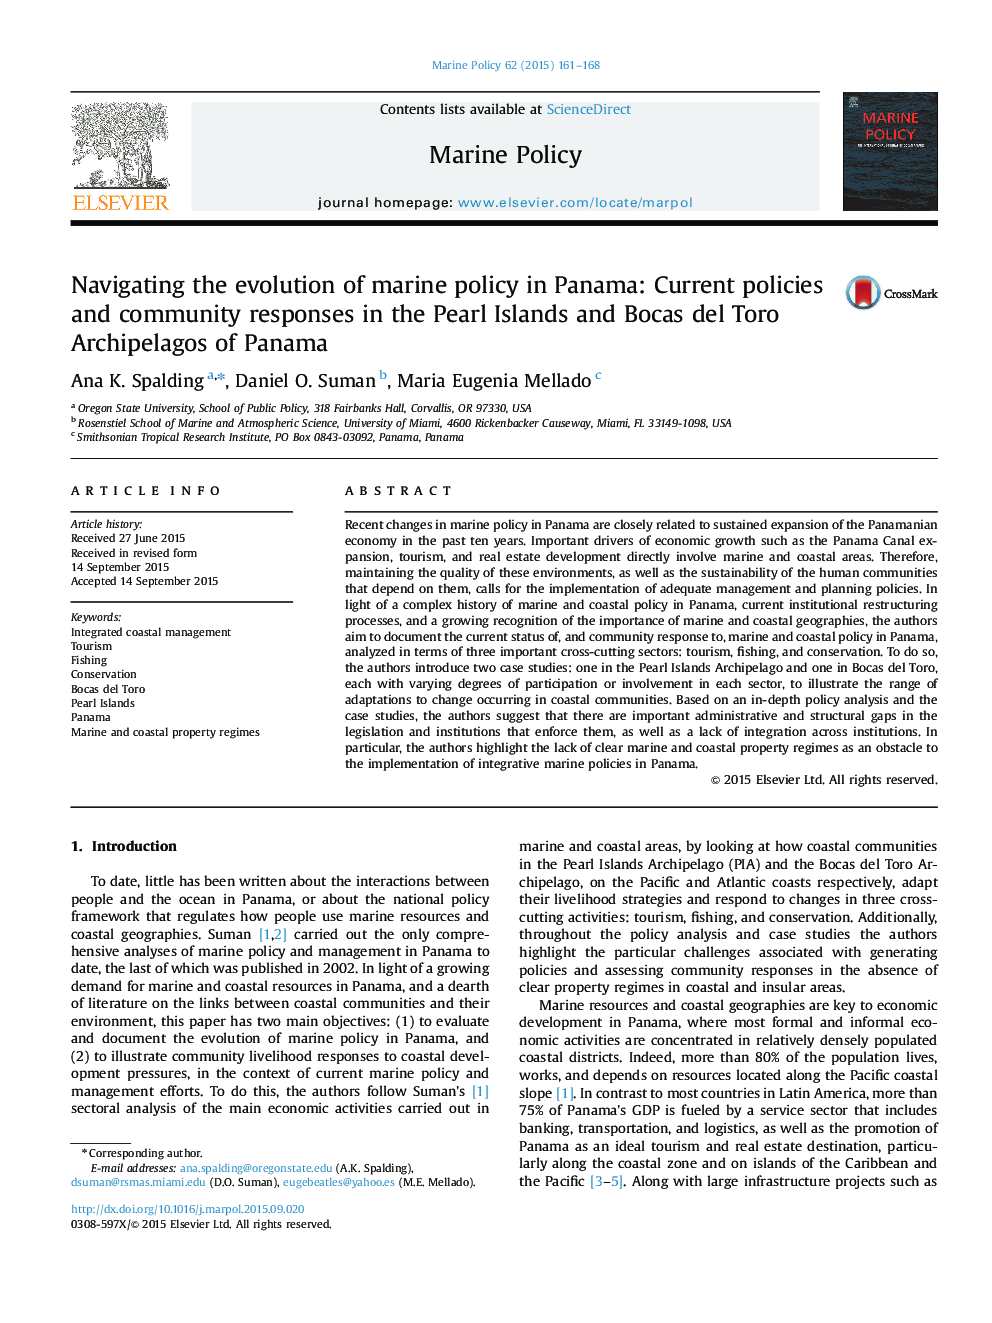 Navigating the evolution of marine policy in Panama: Current policies and community responses in the Pearl Islands and Bocas del Toro Archipelagos of Panama